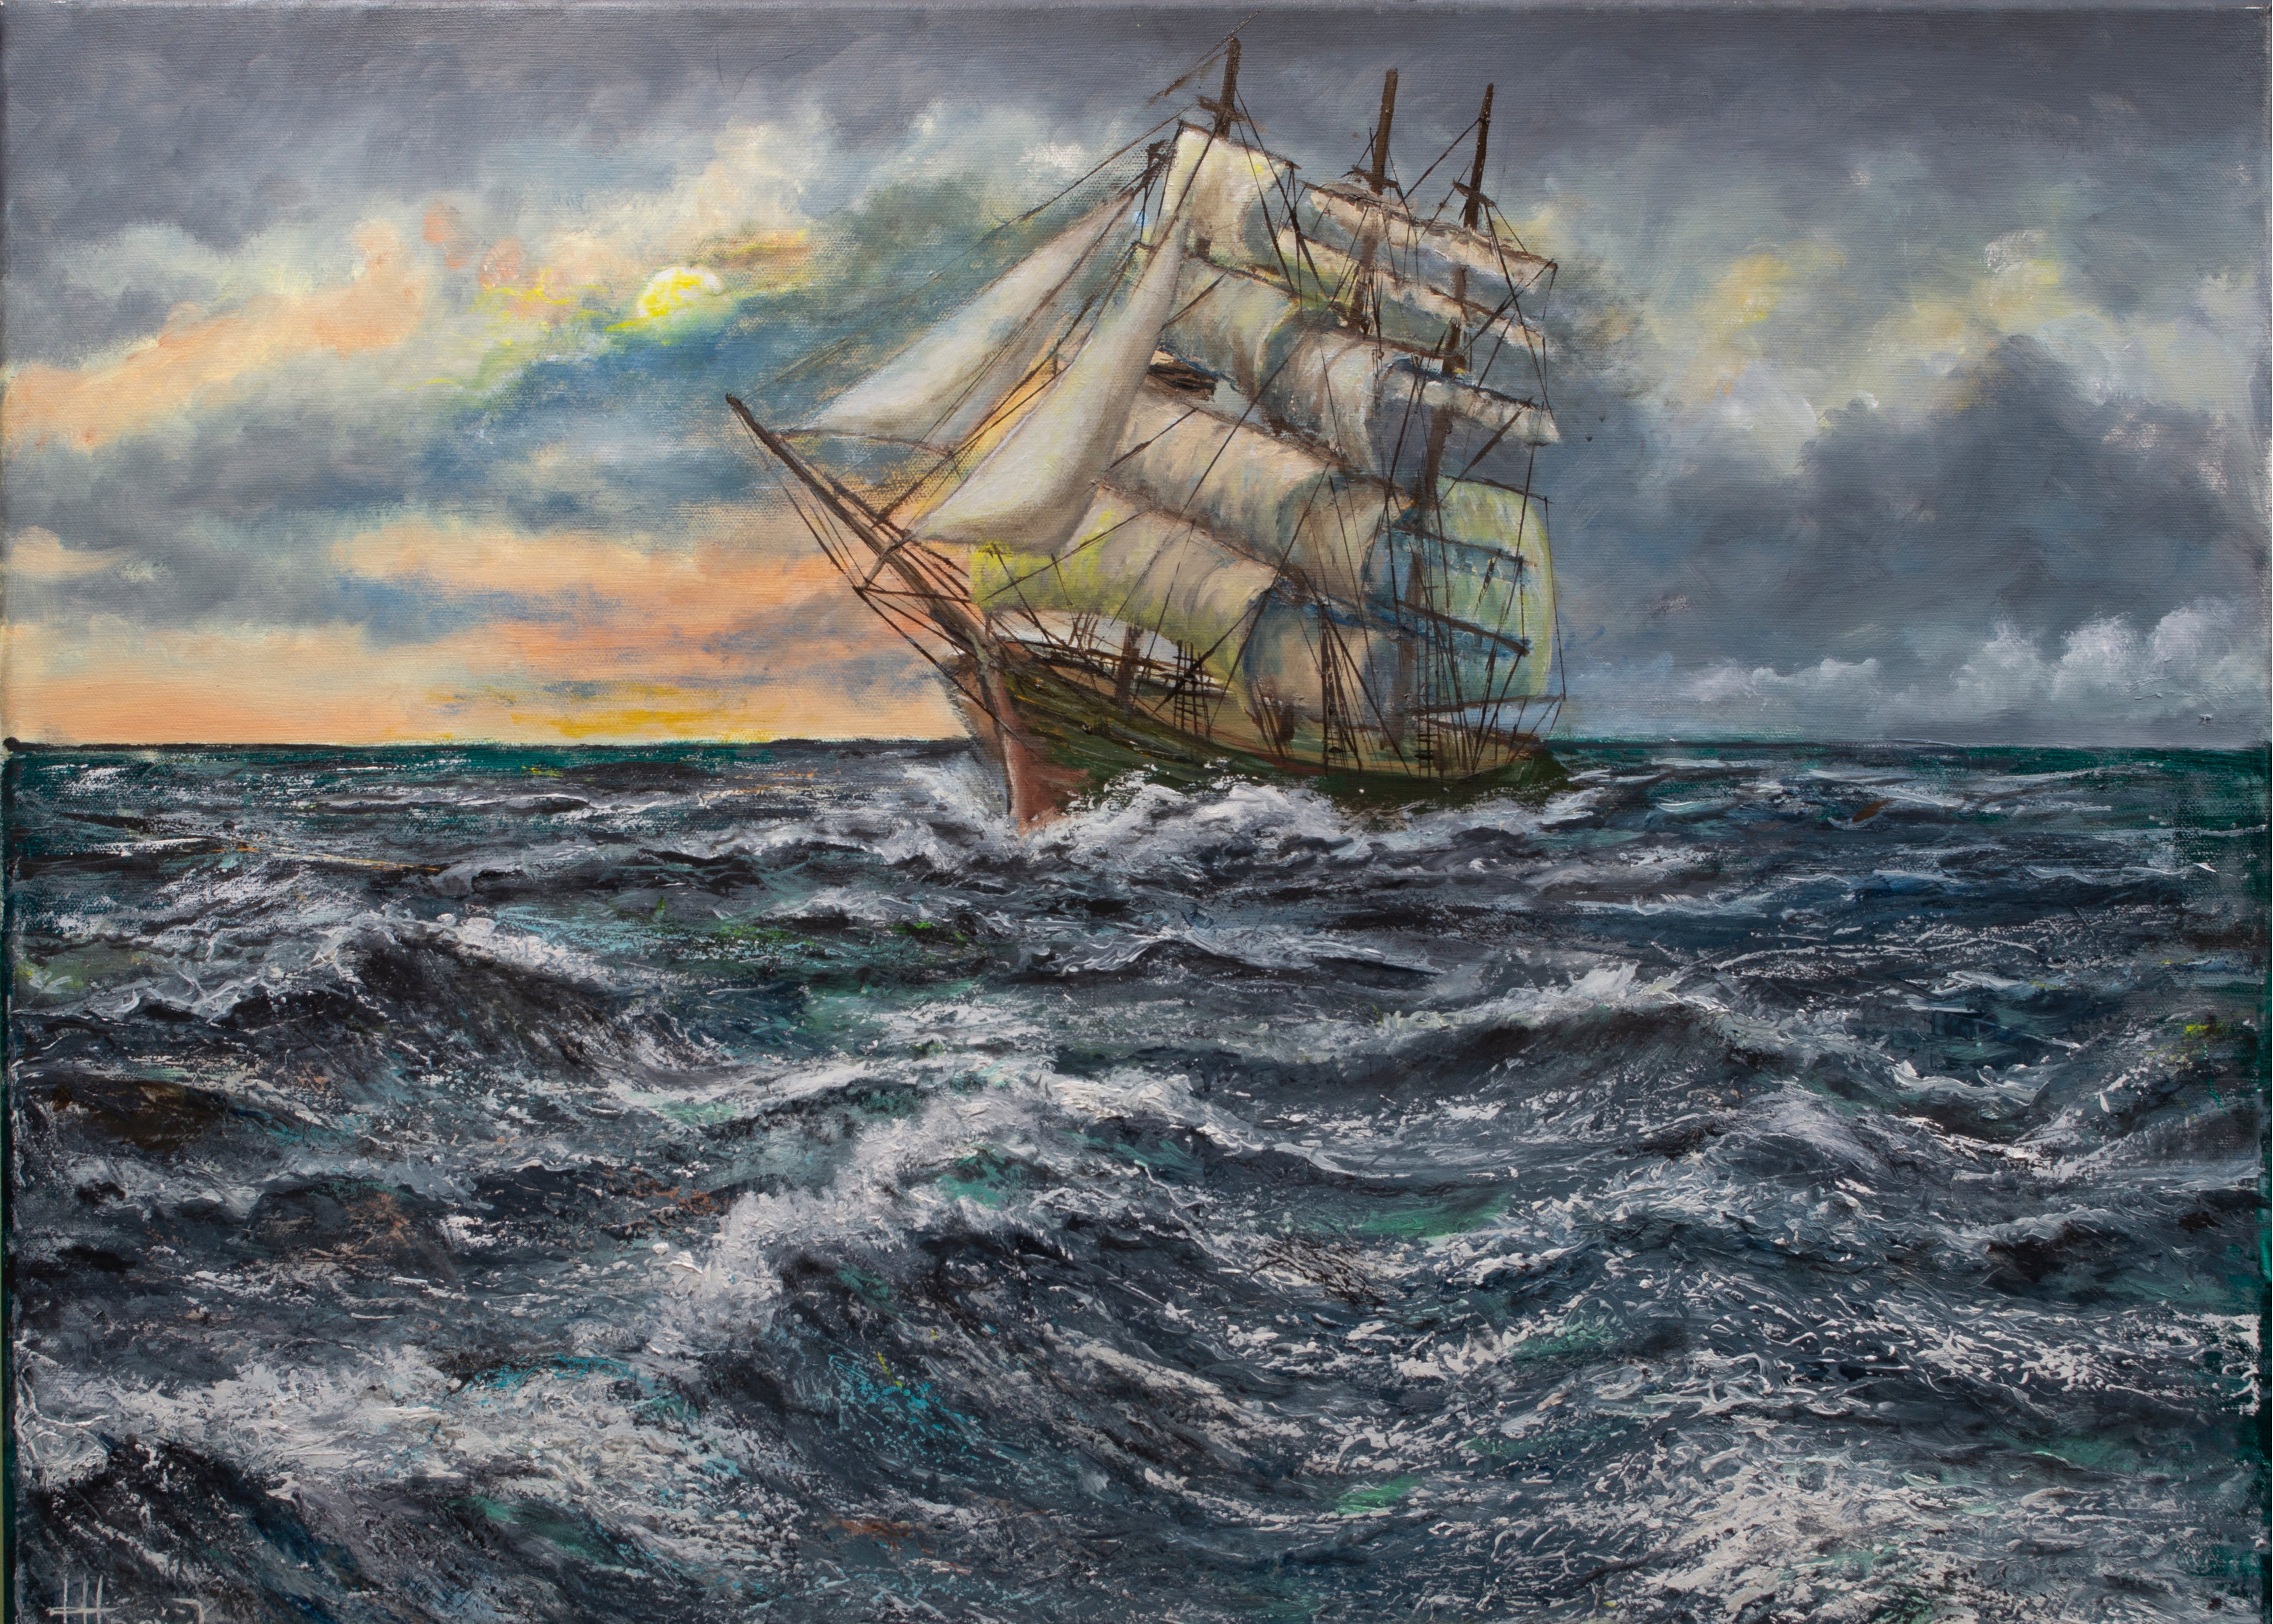 "Through the Storm" 24 x36 Original Oil SOLD  16 x20 Prints Available.